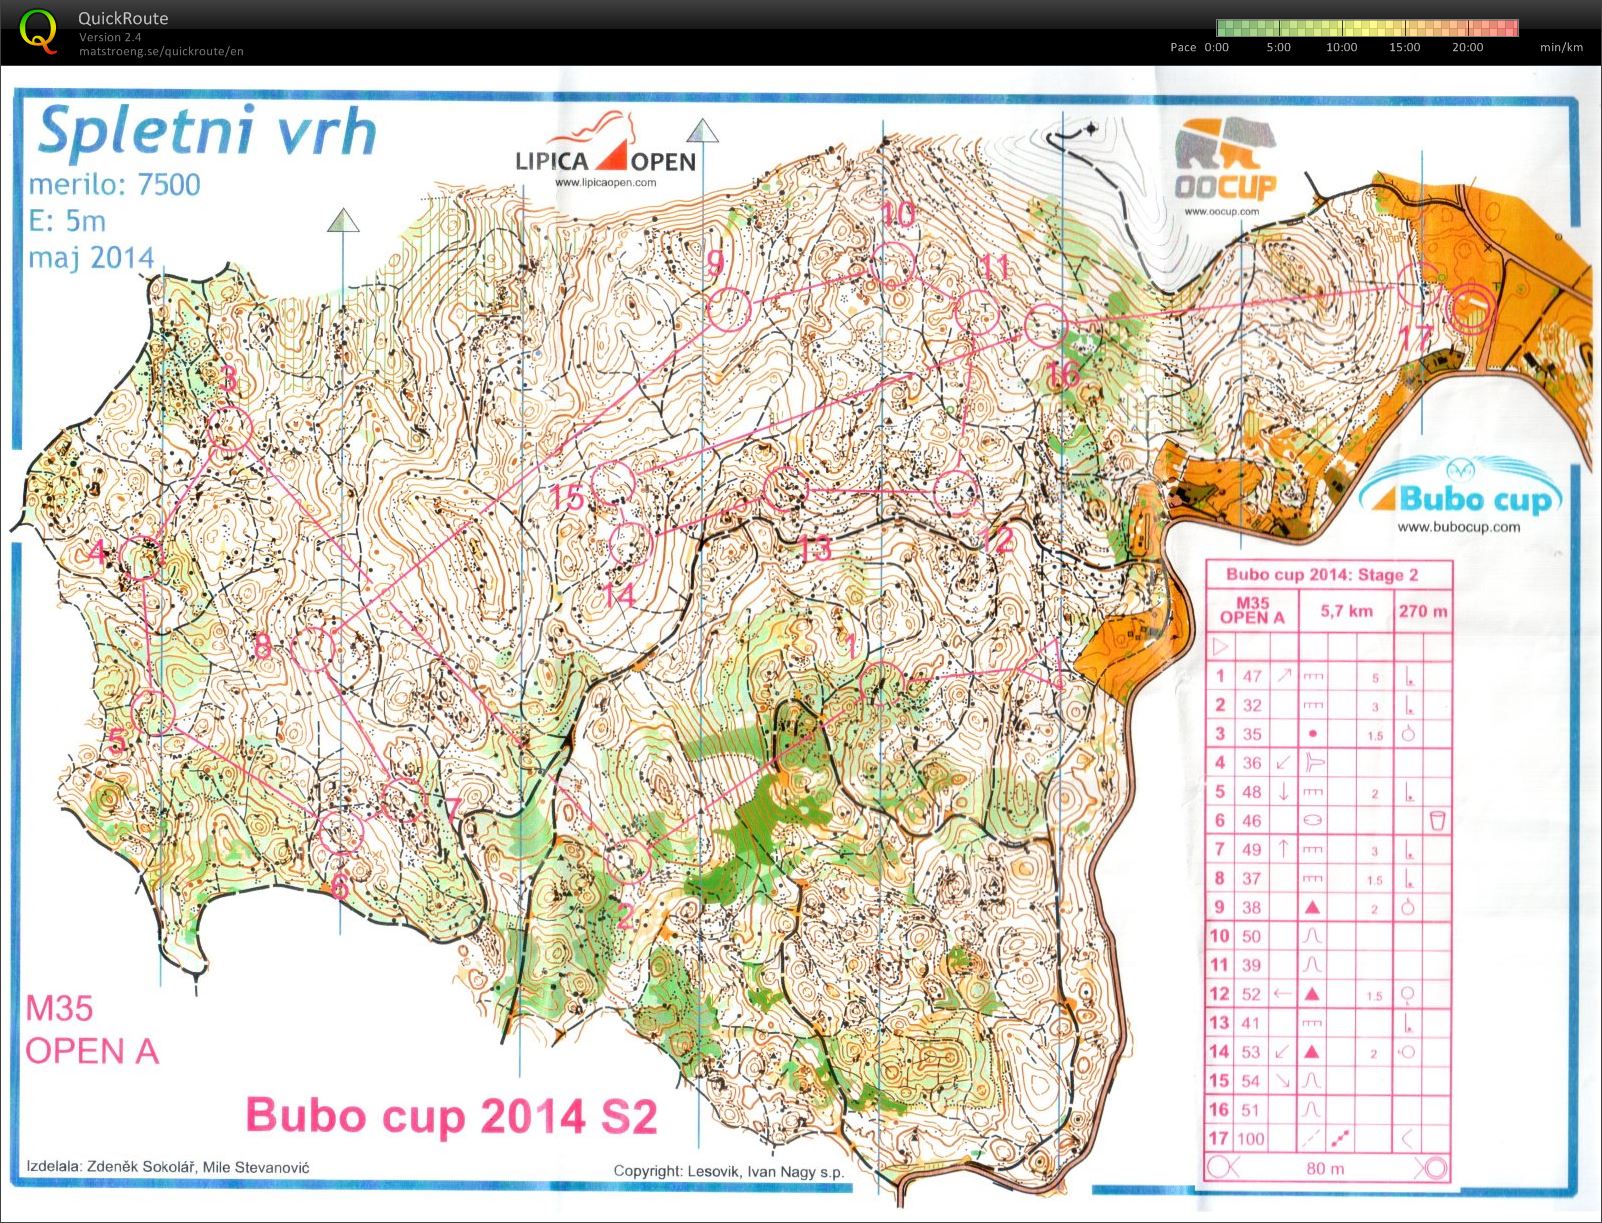 Bubo cup (stage 2) (25-07-2014)